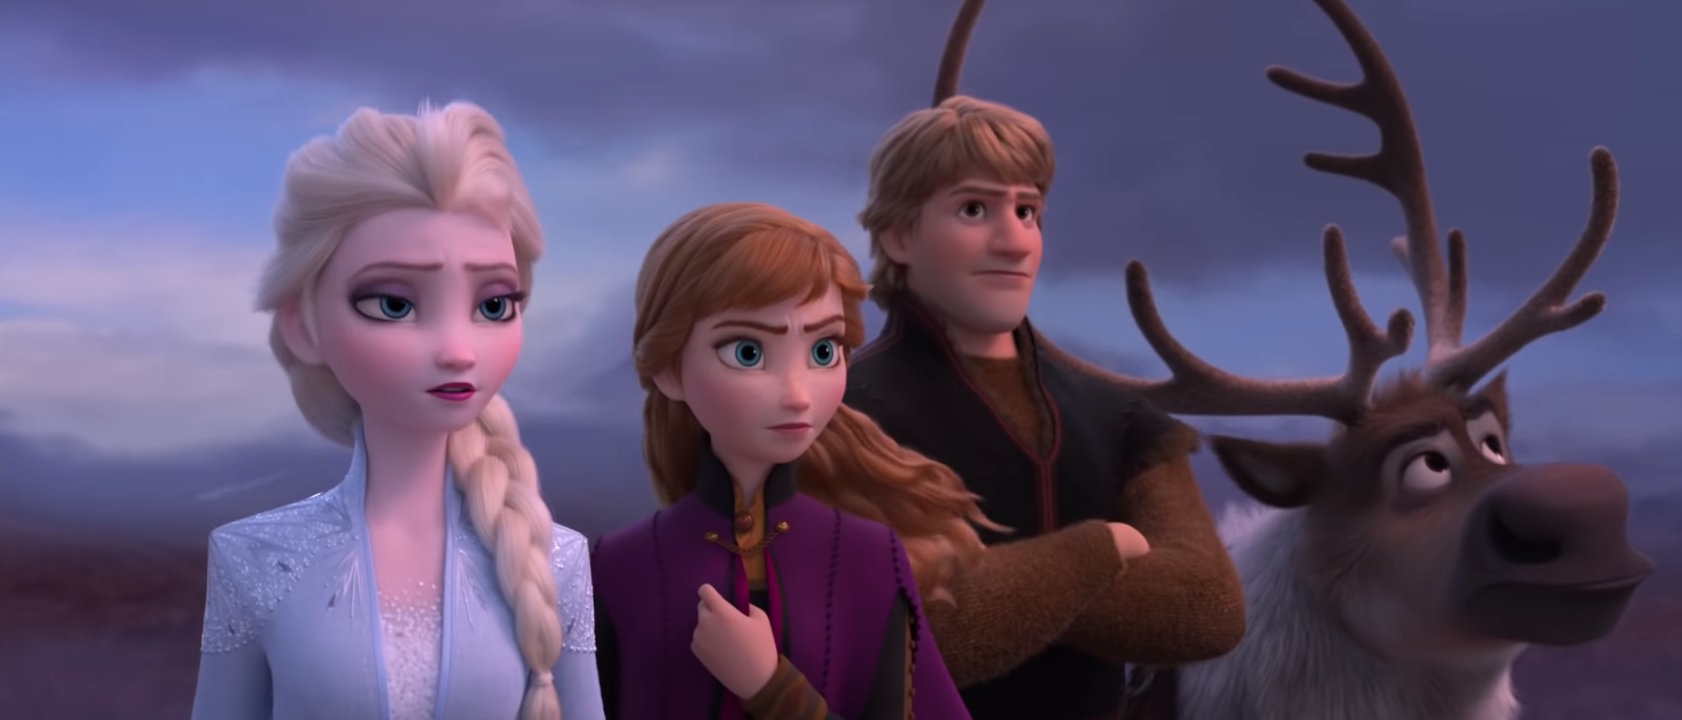 Frozen 3 spoilers: Who can become Elsa’s love? Best storyline assured for ending trilogy